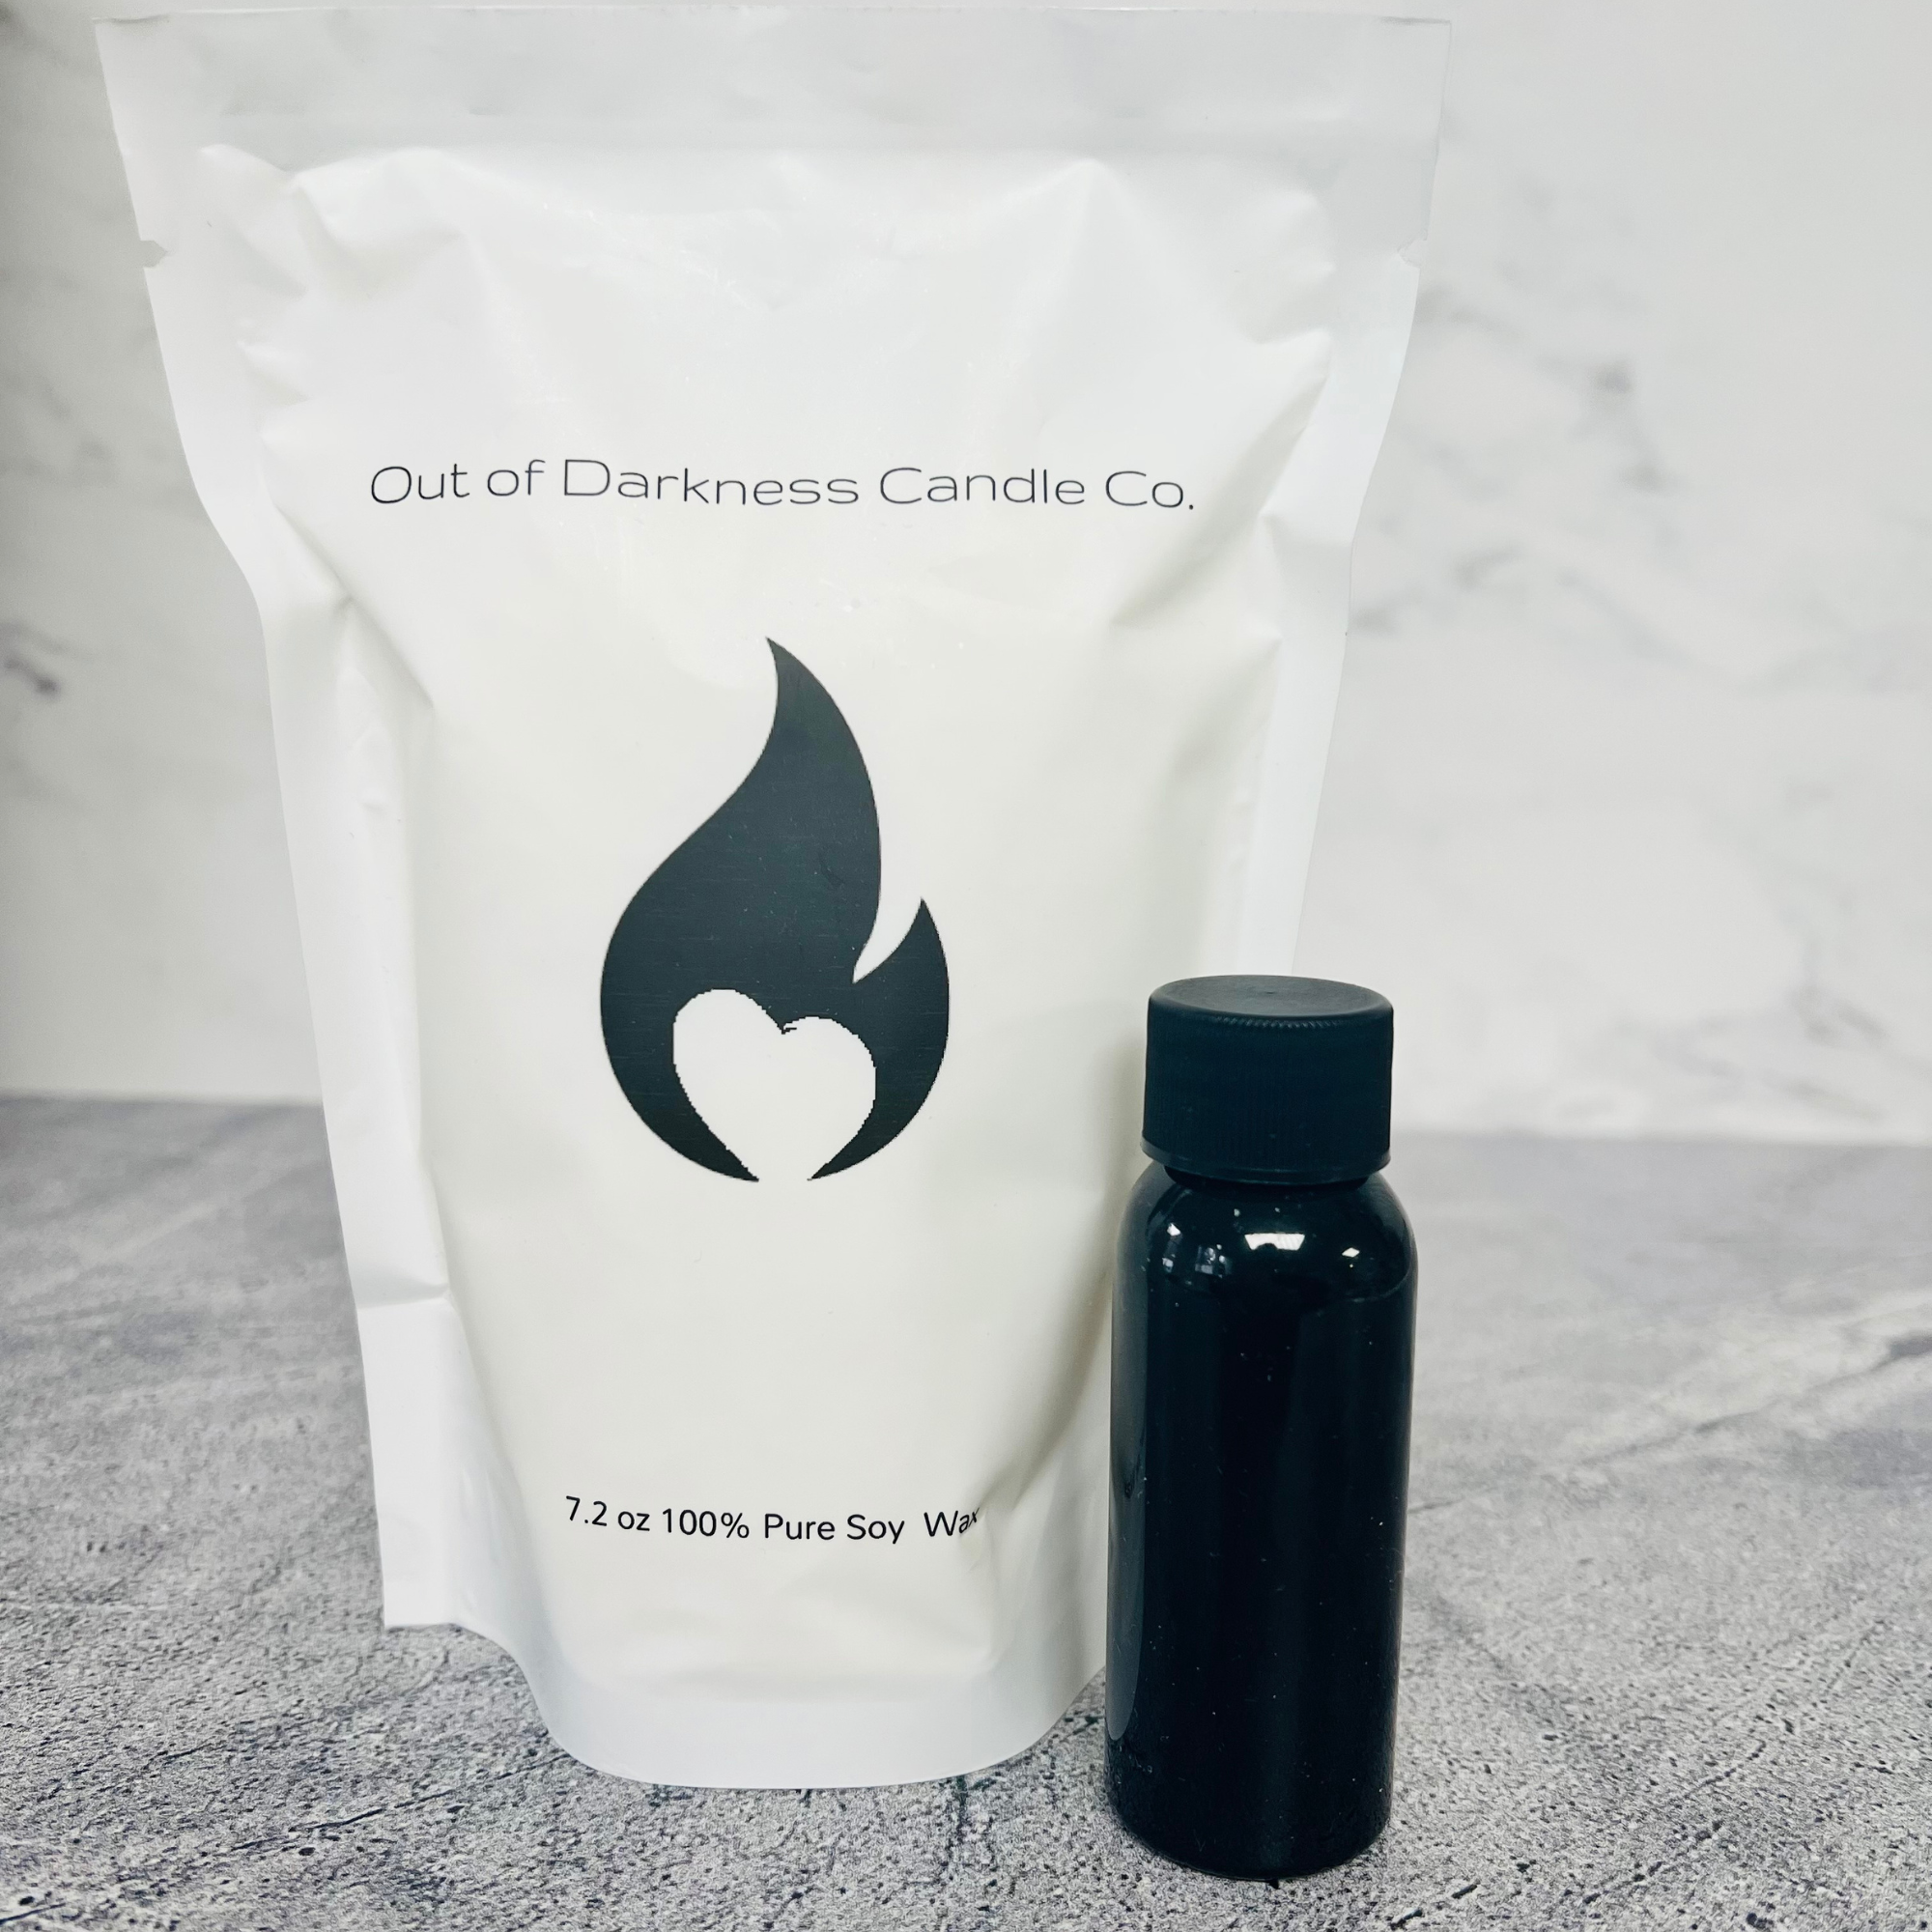 White Bag with black flame logo says 7.2 oz 100% pure soy wax black bottle next to it